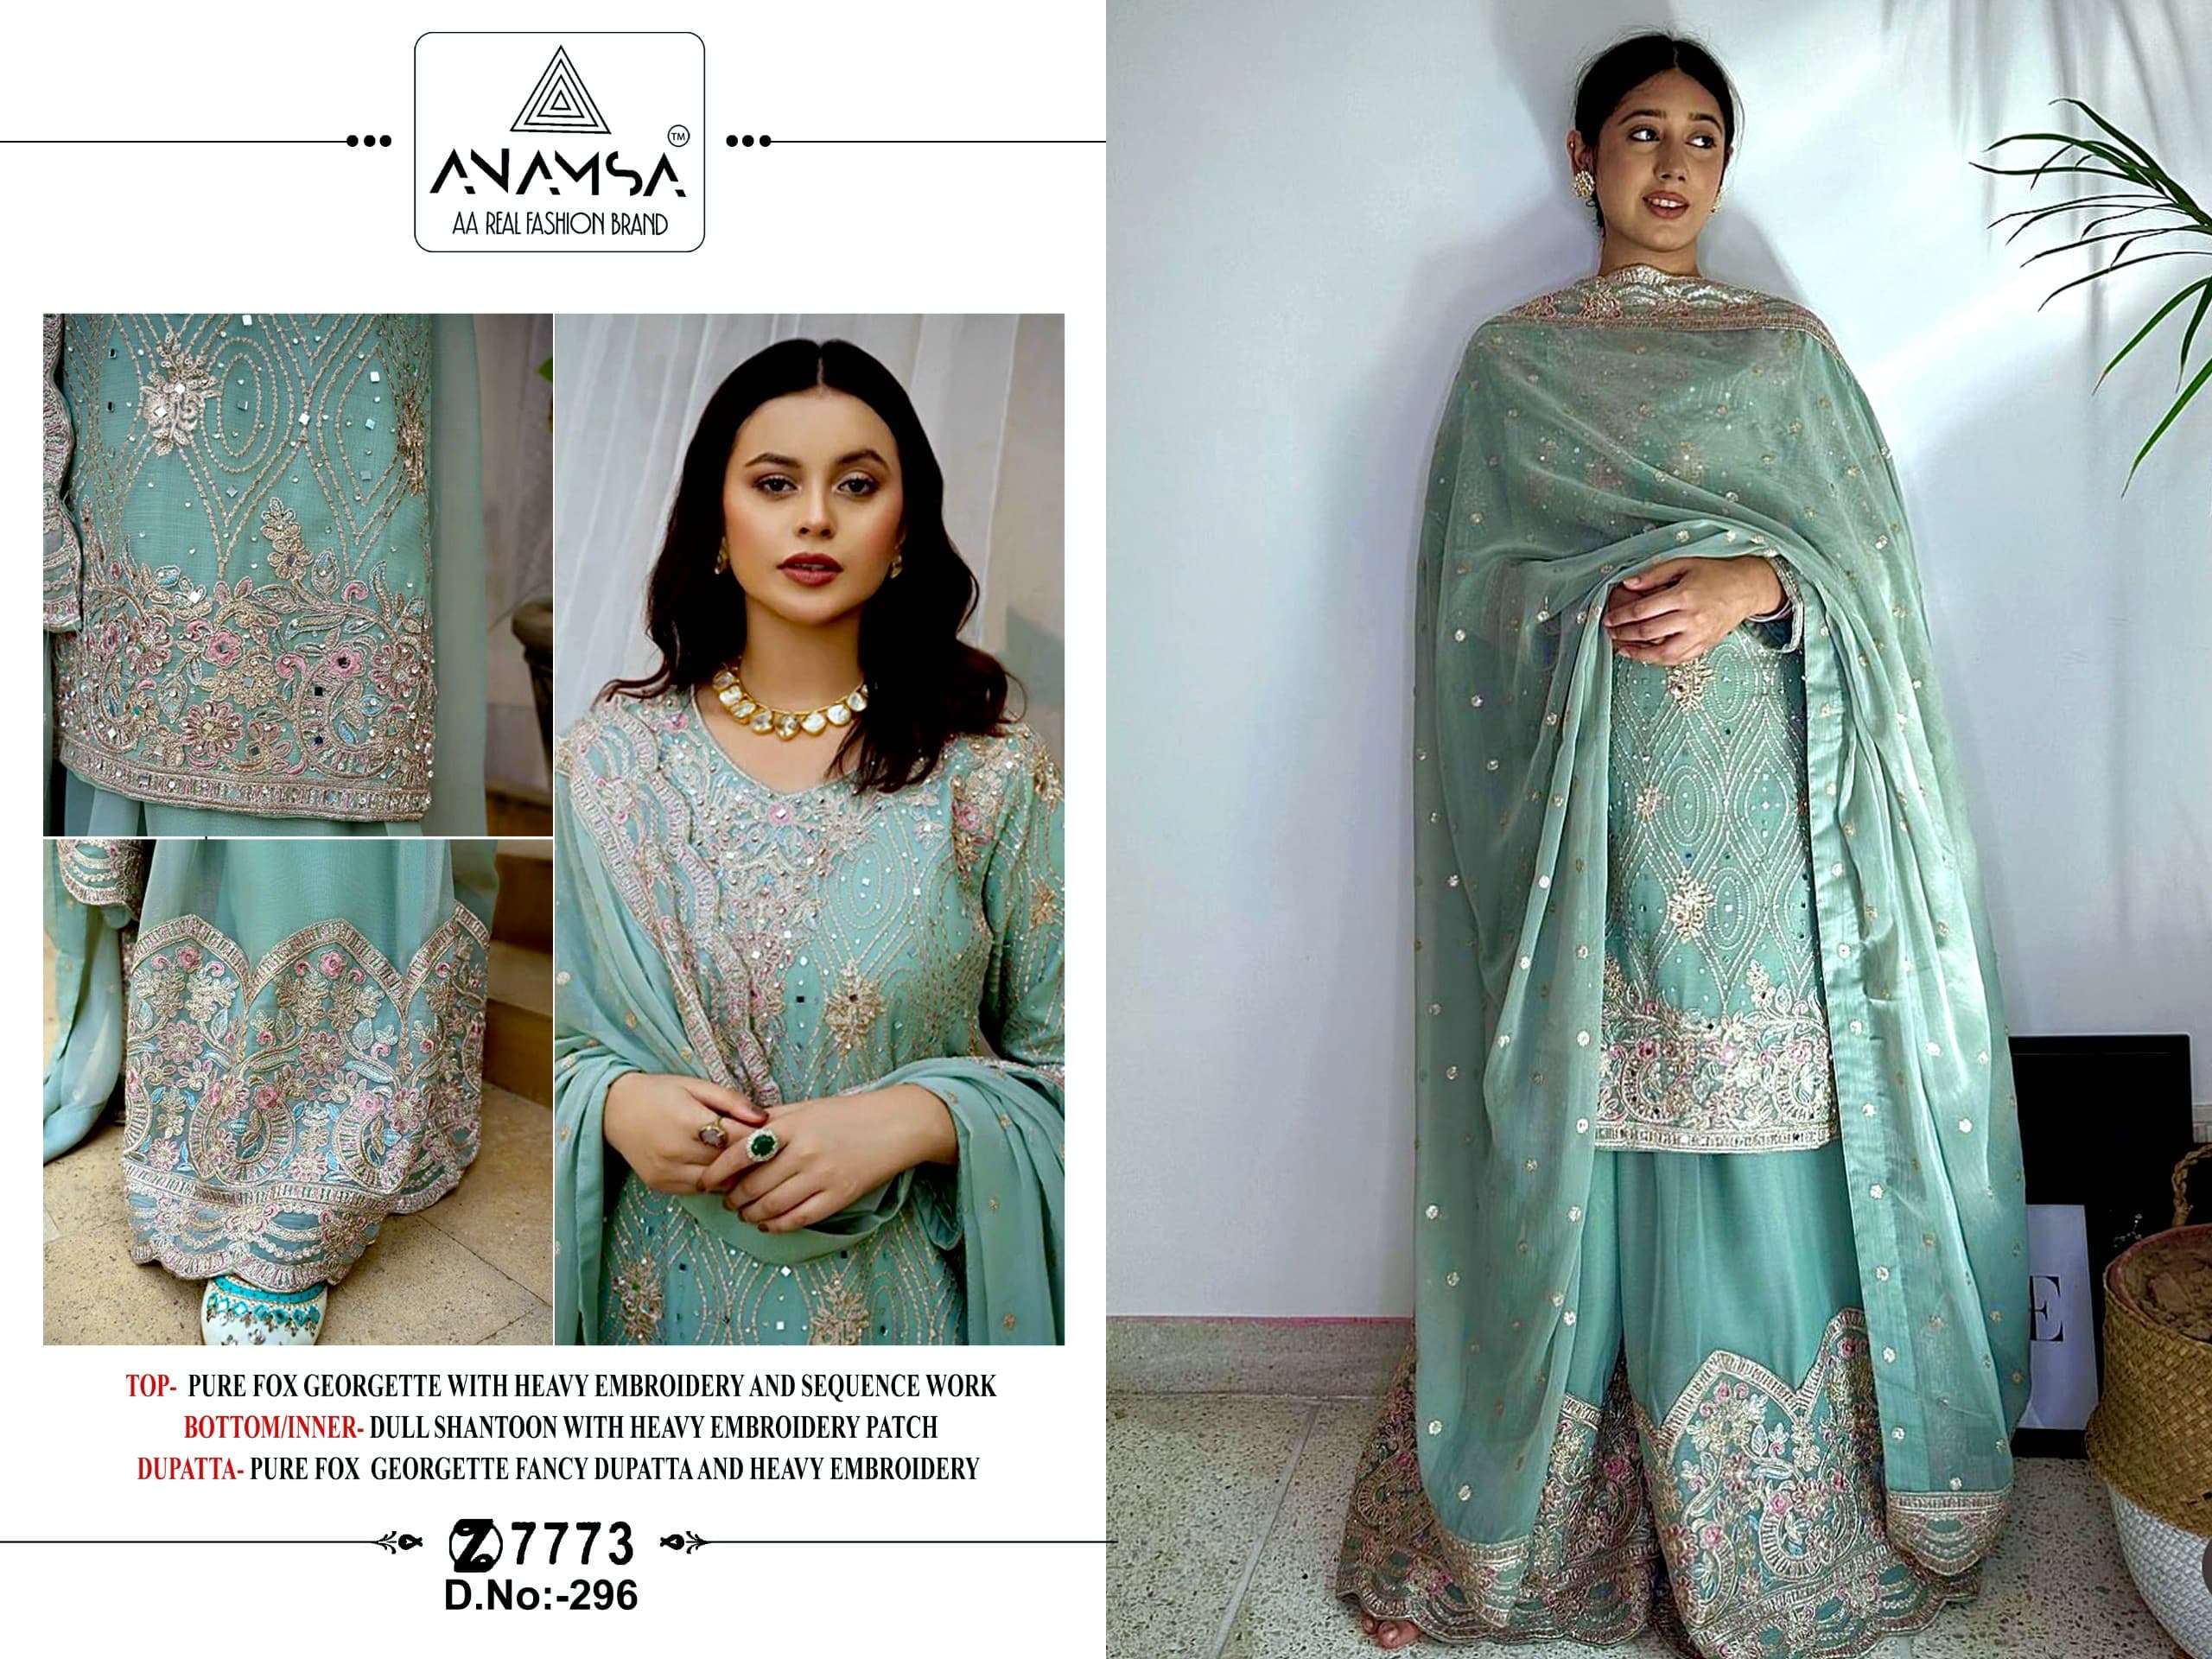 ANAMSA 296 GEORGETTE WITH EMBROIDERY WORK PAKISTANI SUITS